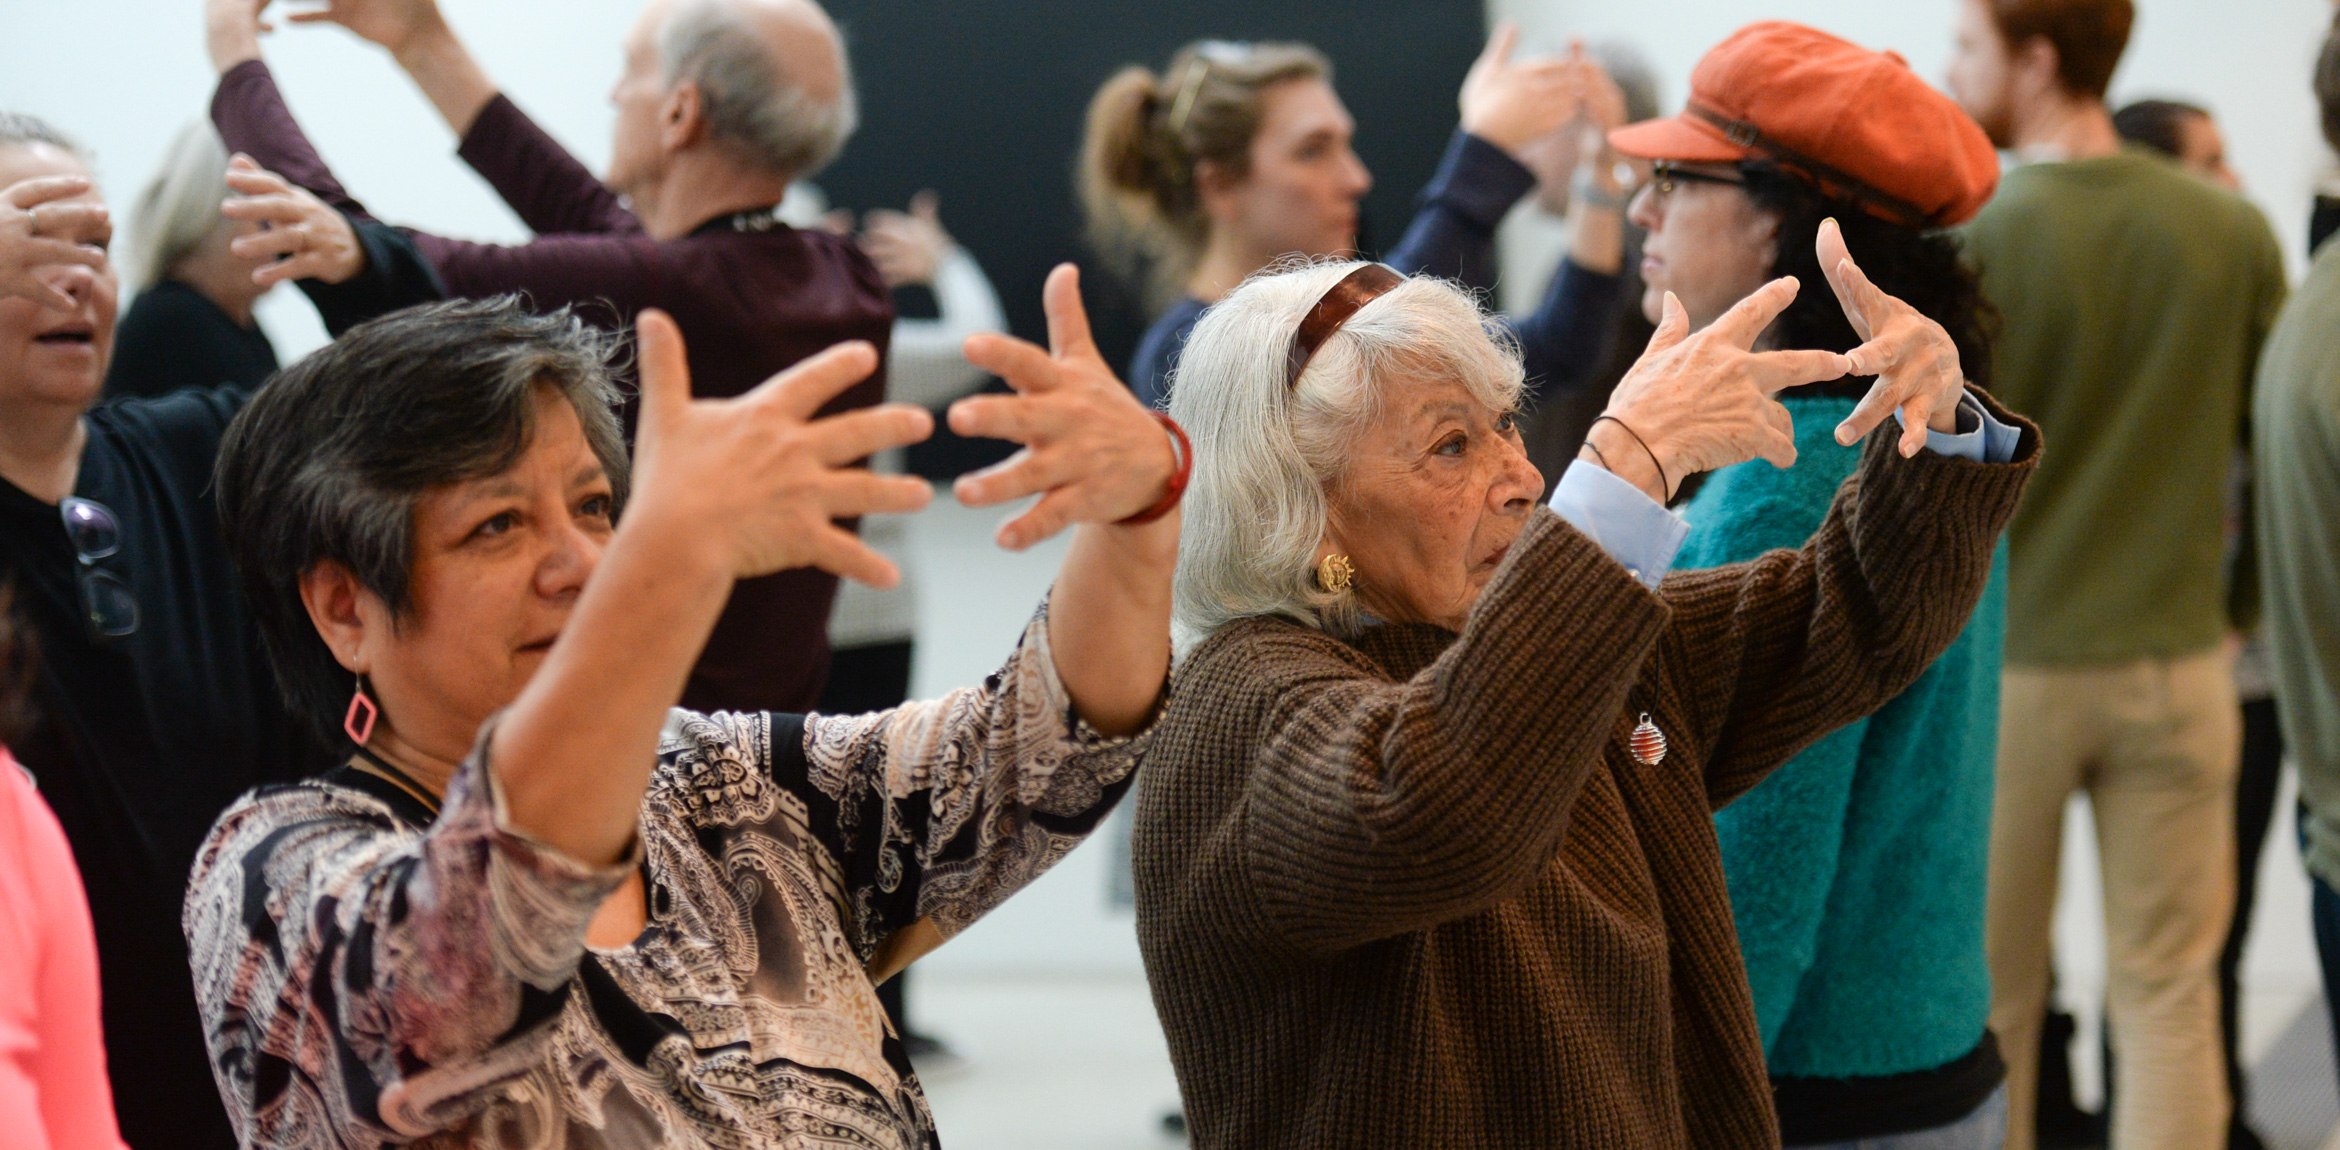 Visitors participate in an exercise, holding their hands up facing themselves.